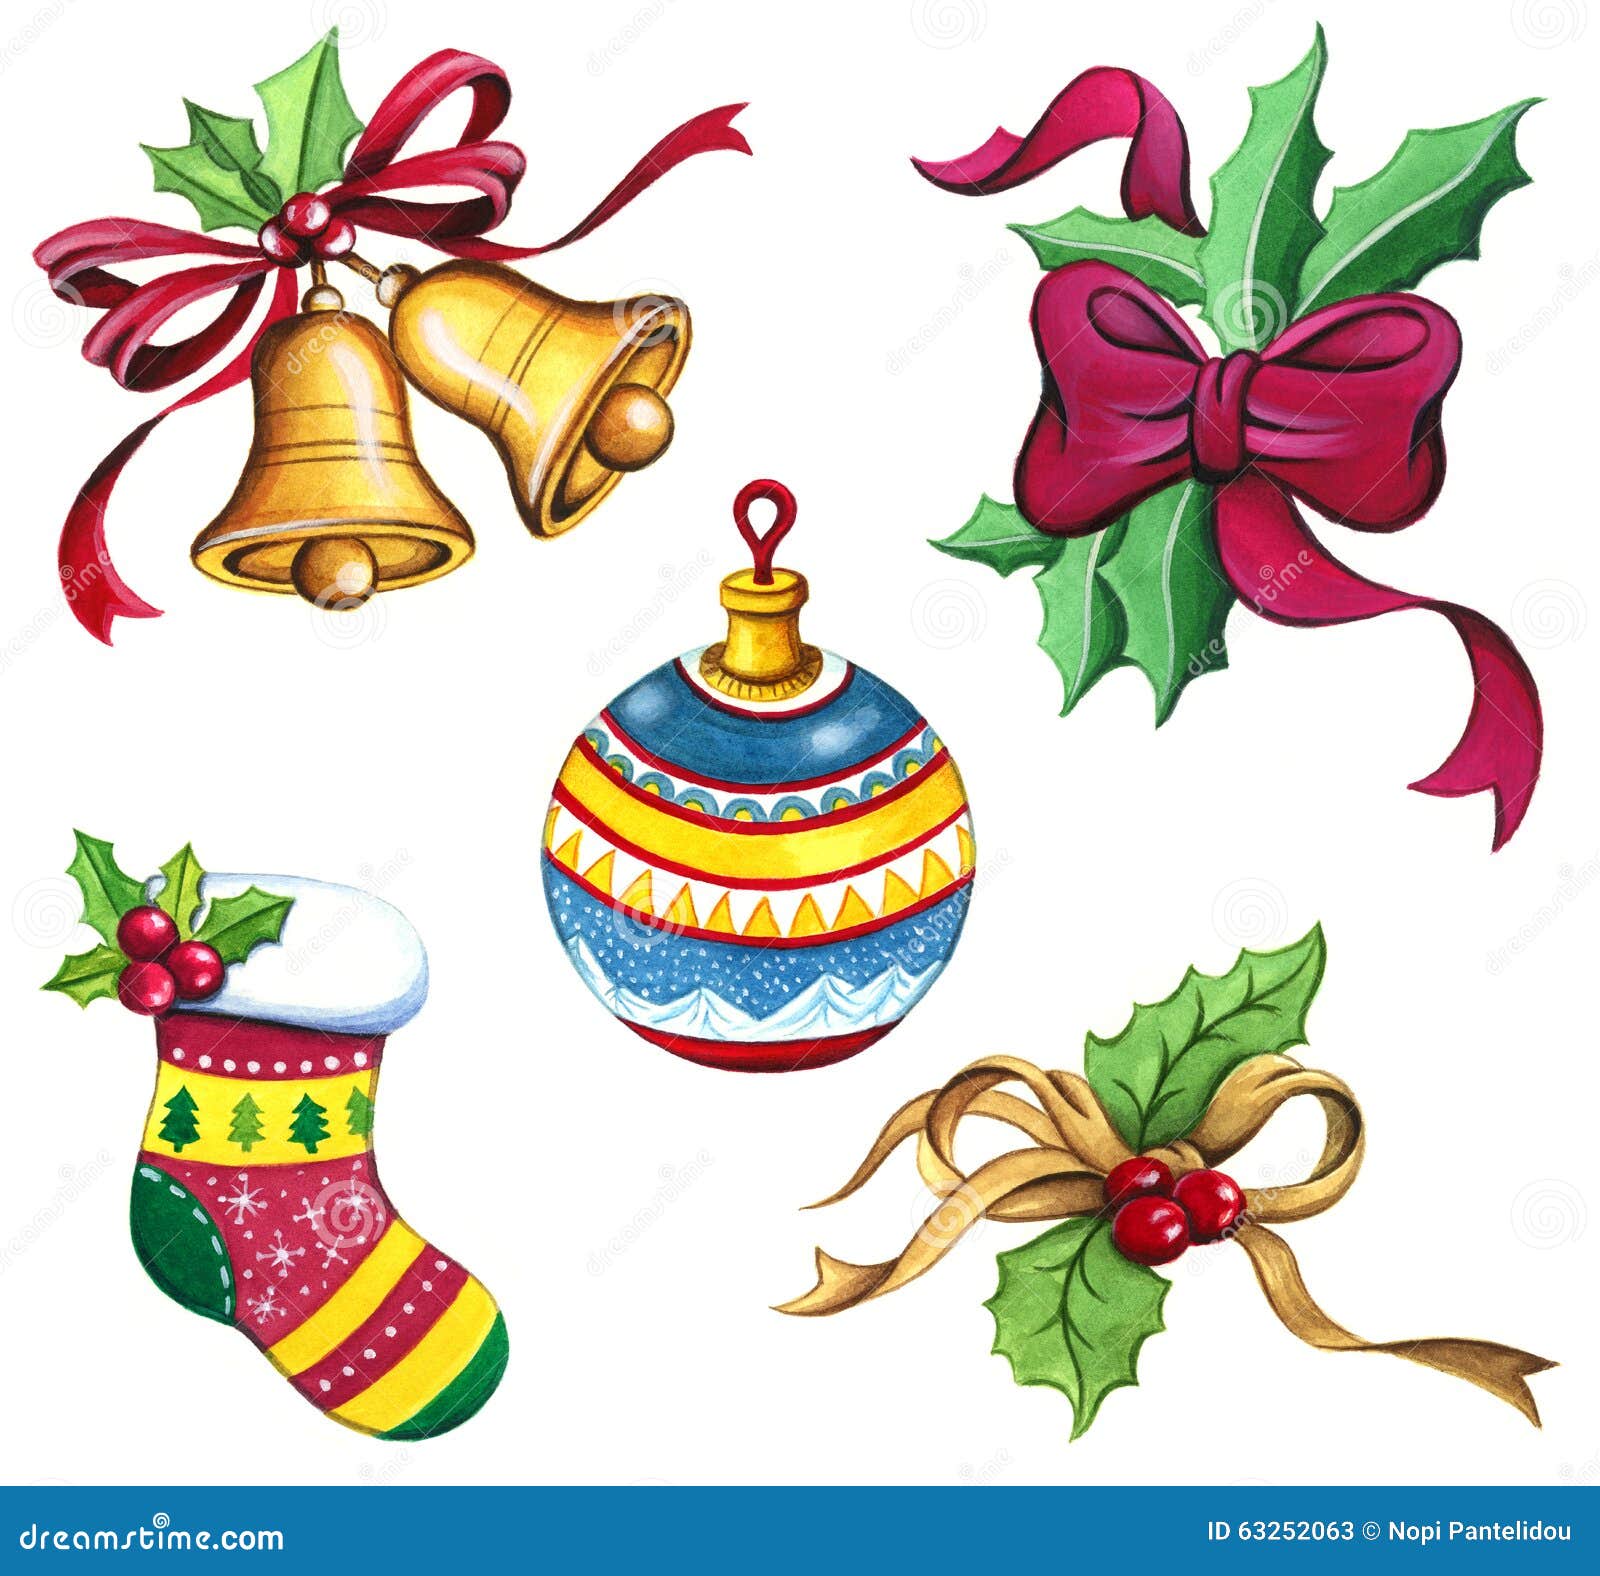 clipart free natale - photo #4